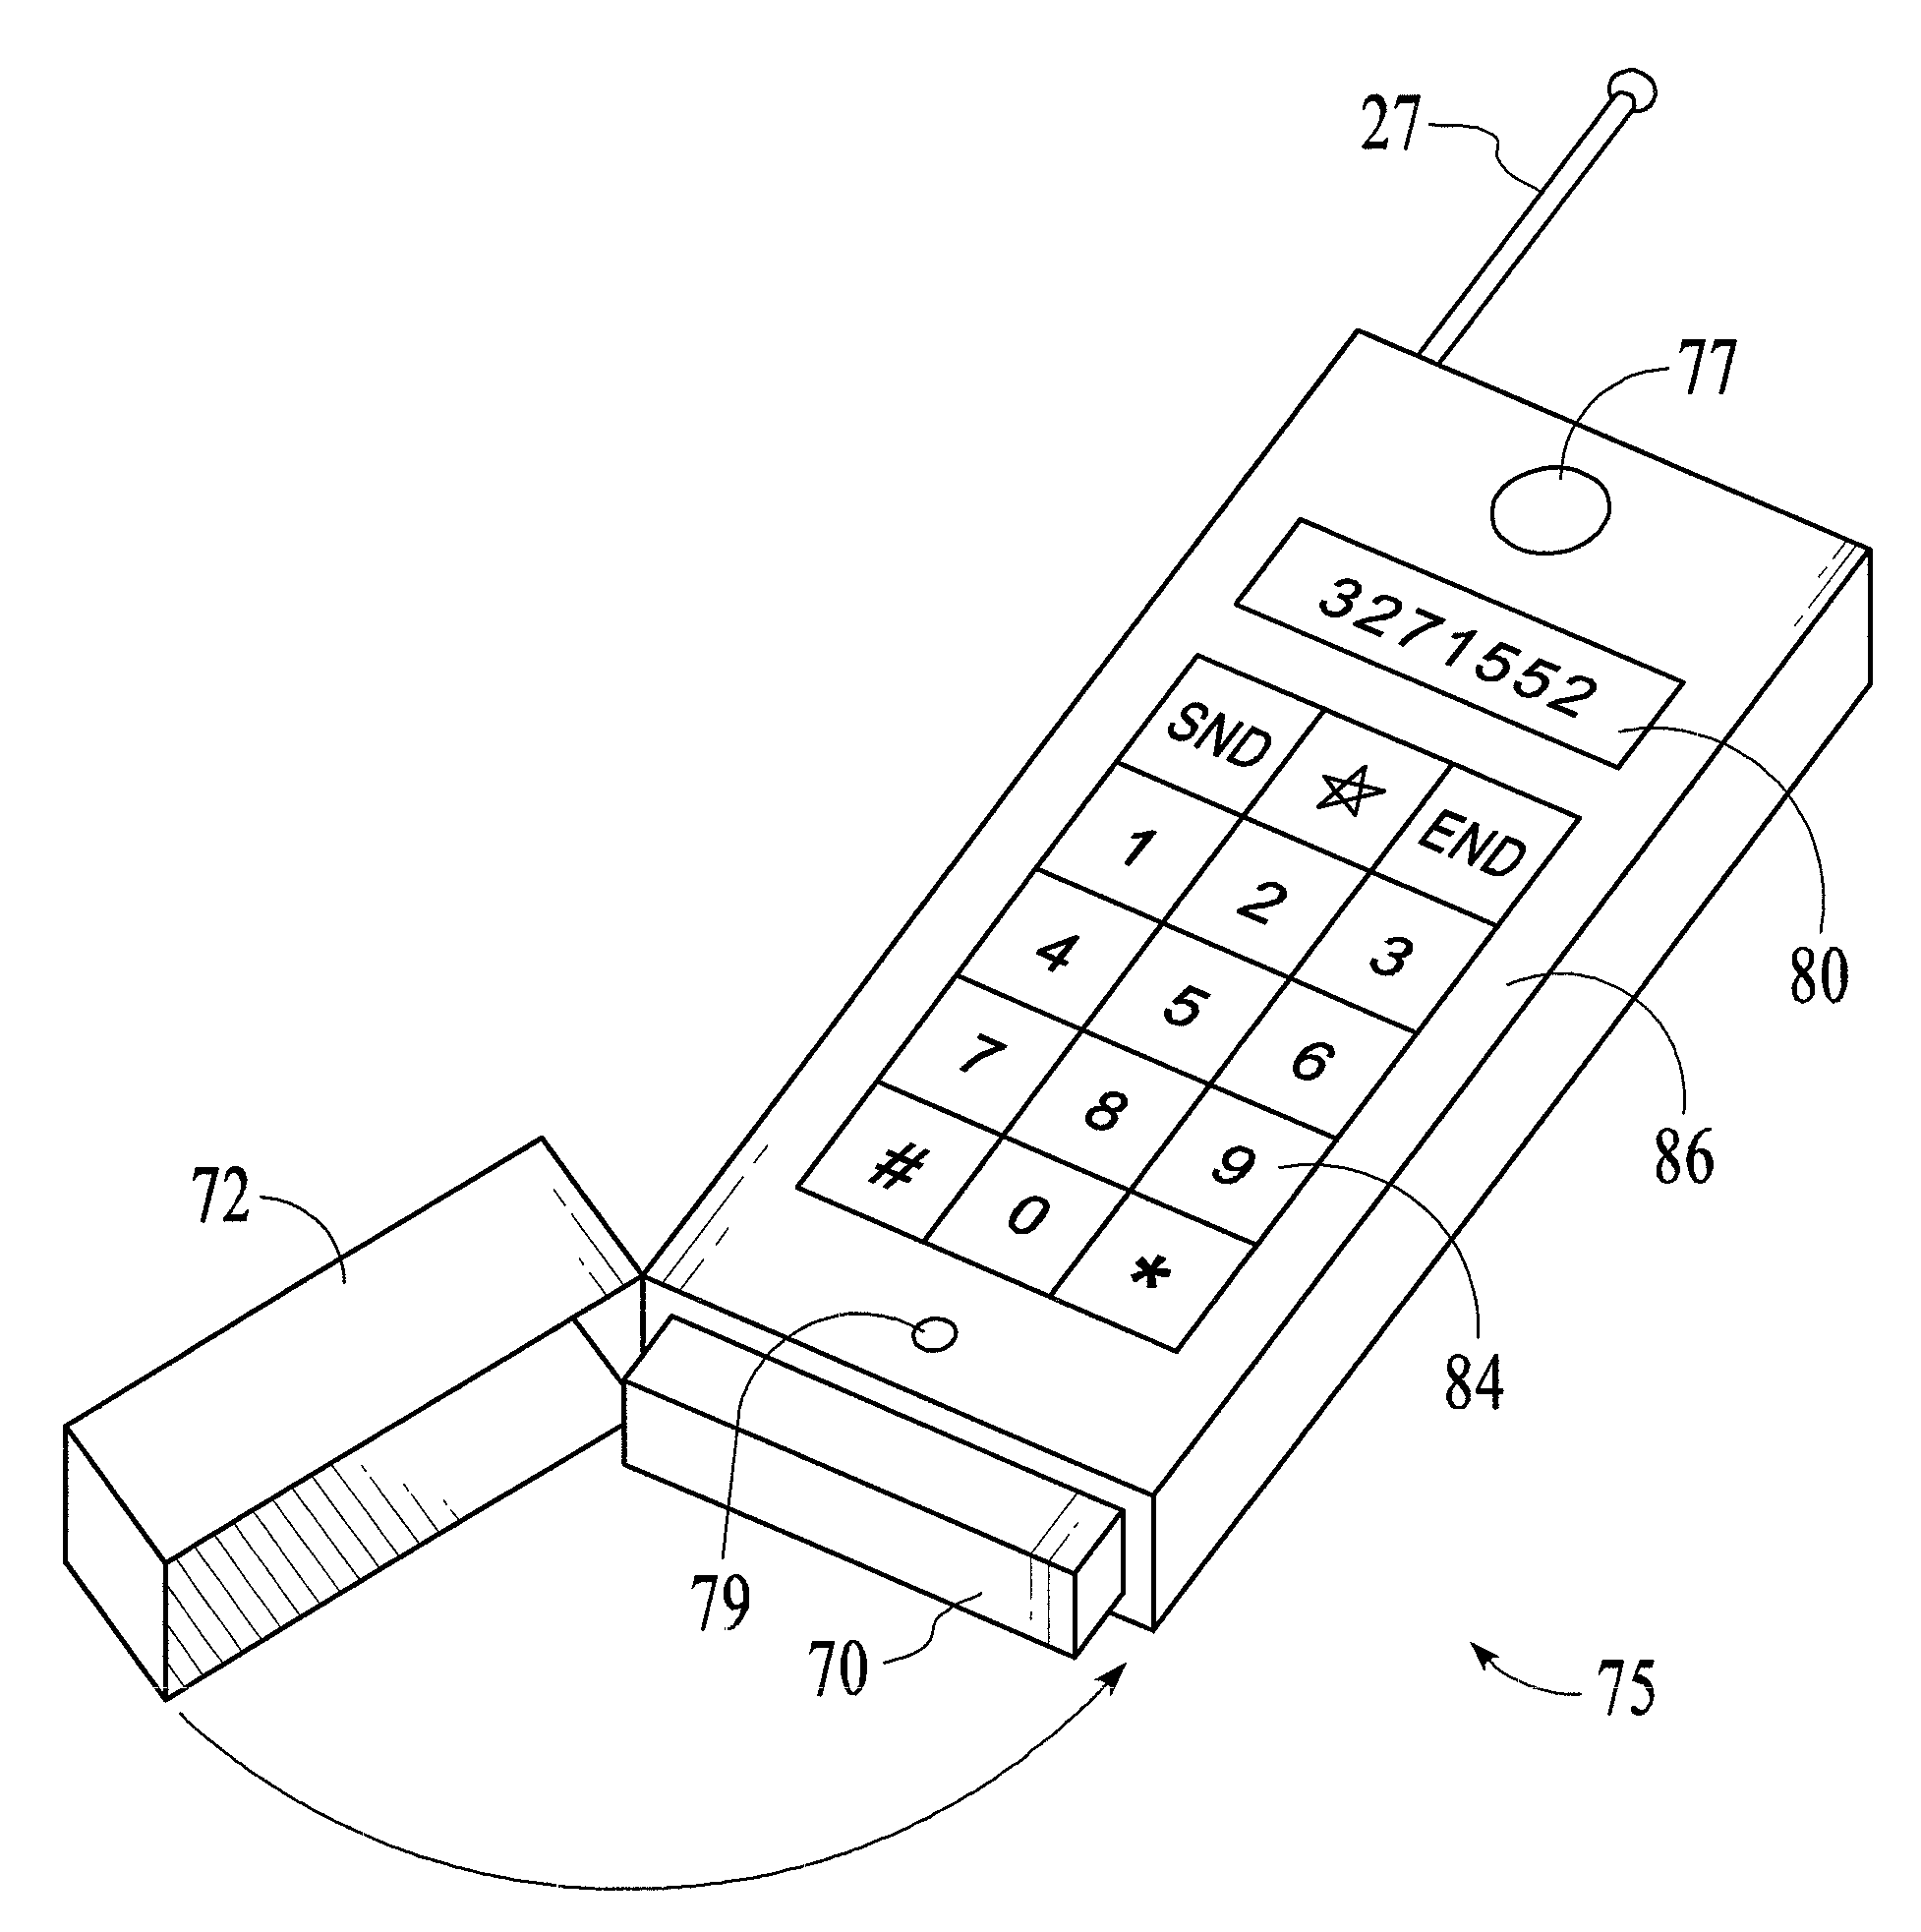 Methods and Apparatus for a Flexible Wireless Communication and Cellular Telephone System